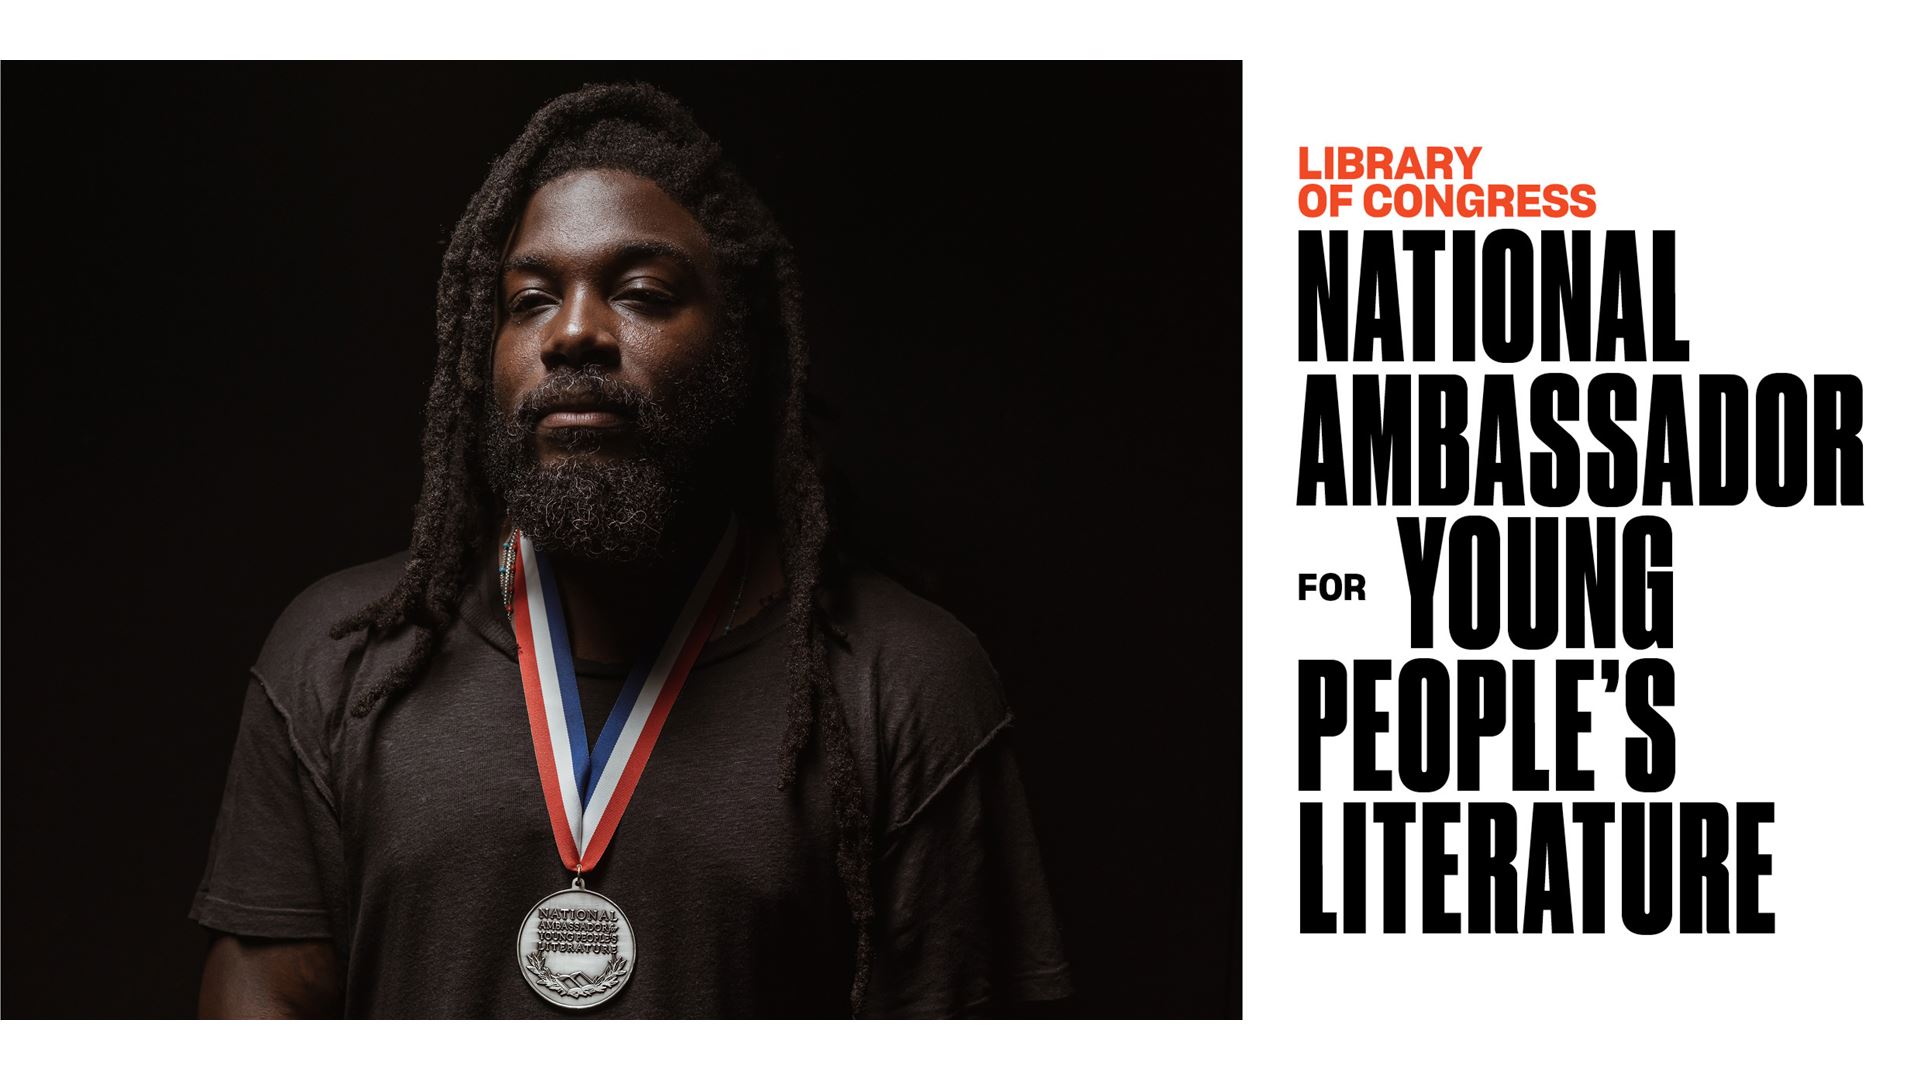 Jason Reynolds, National Ambassador for Young People’s Literature, Expands Commitment to Rural America with In-Person Events This Spring